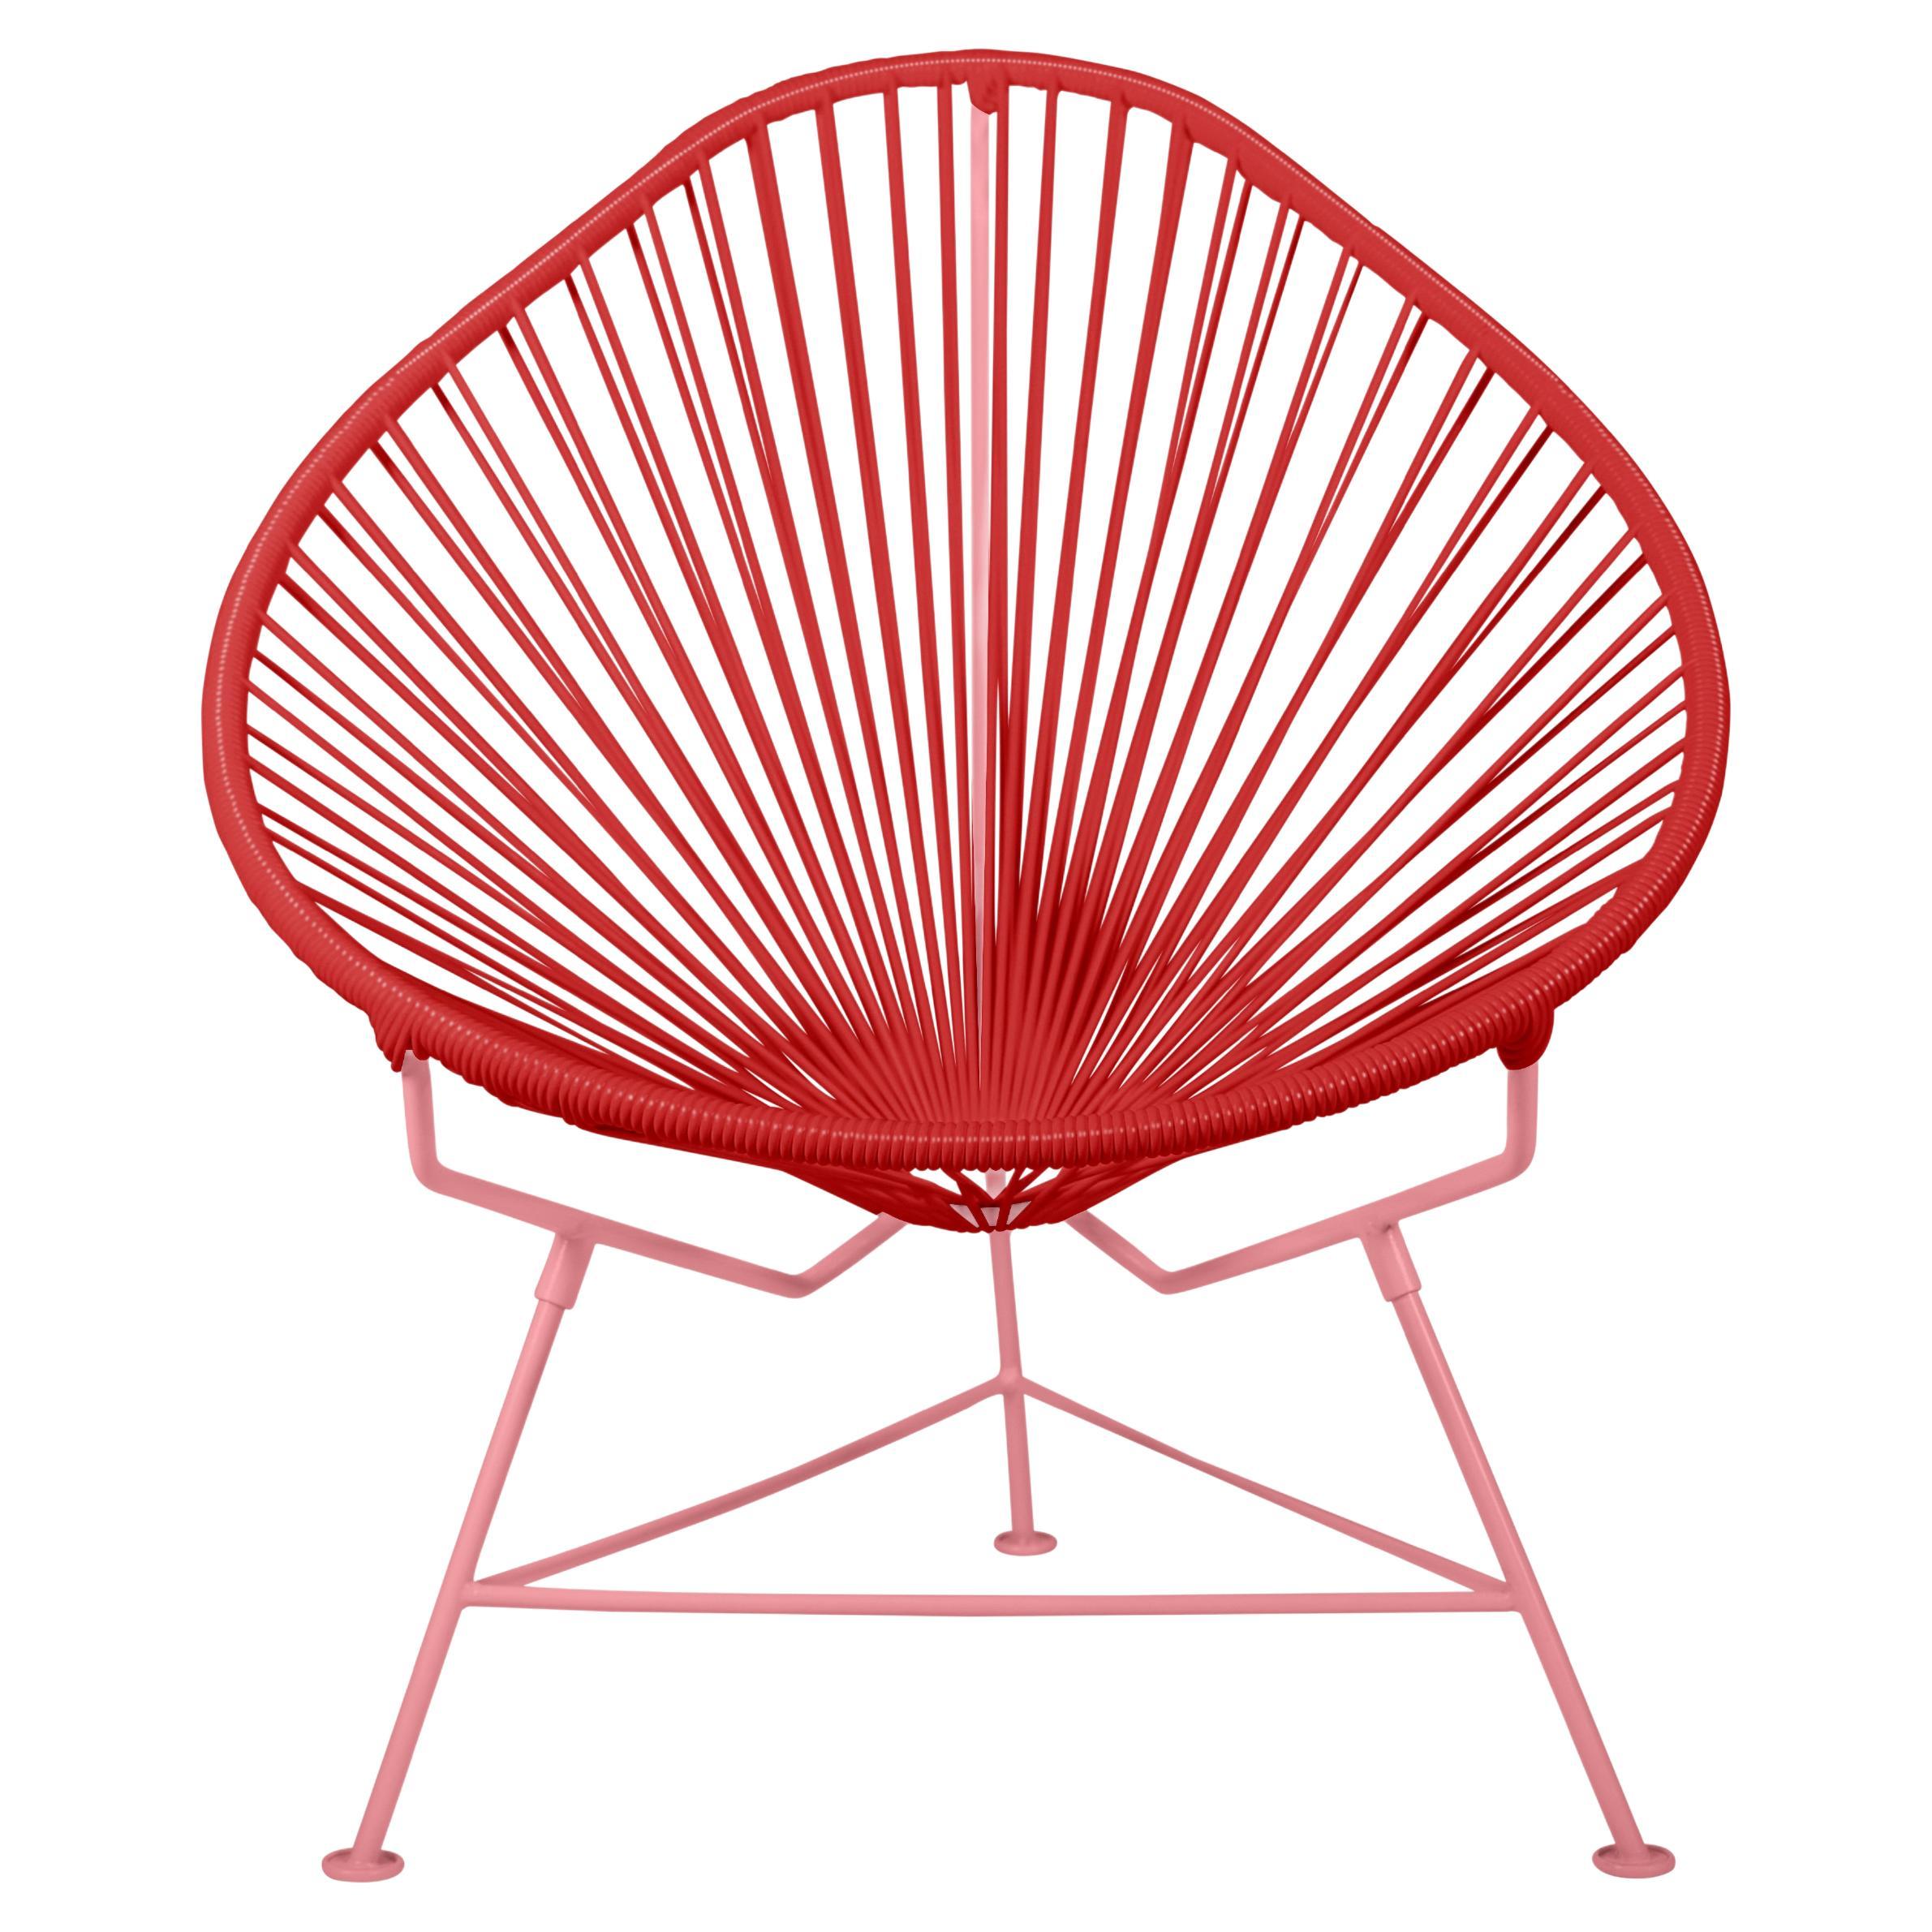 Innit Designs Acapulco Chair Red Weave on Coral Frame